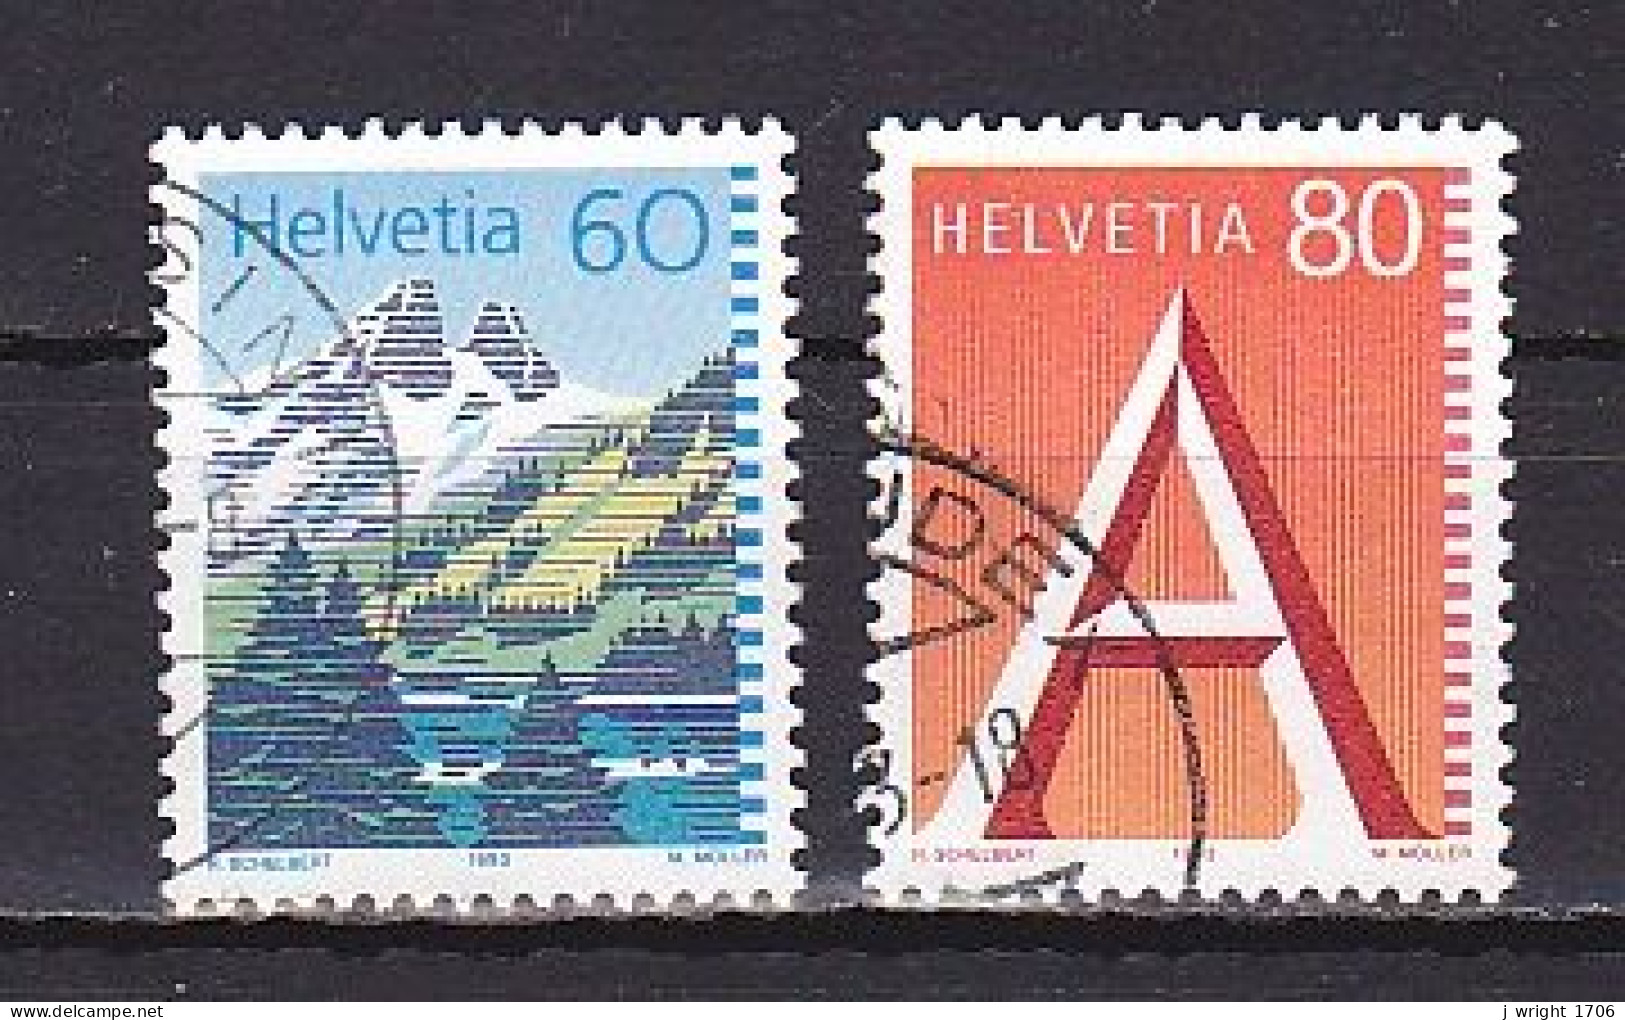 Switzerland, 1993, Lake Tanay & 'A' First Class Stamp, 60c & 80c, USED - Used Stamps